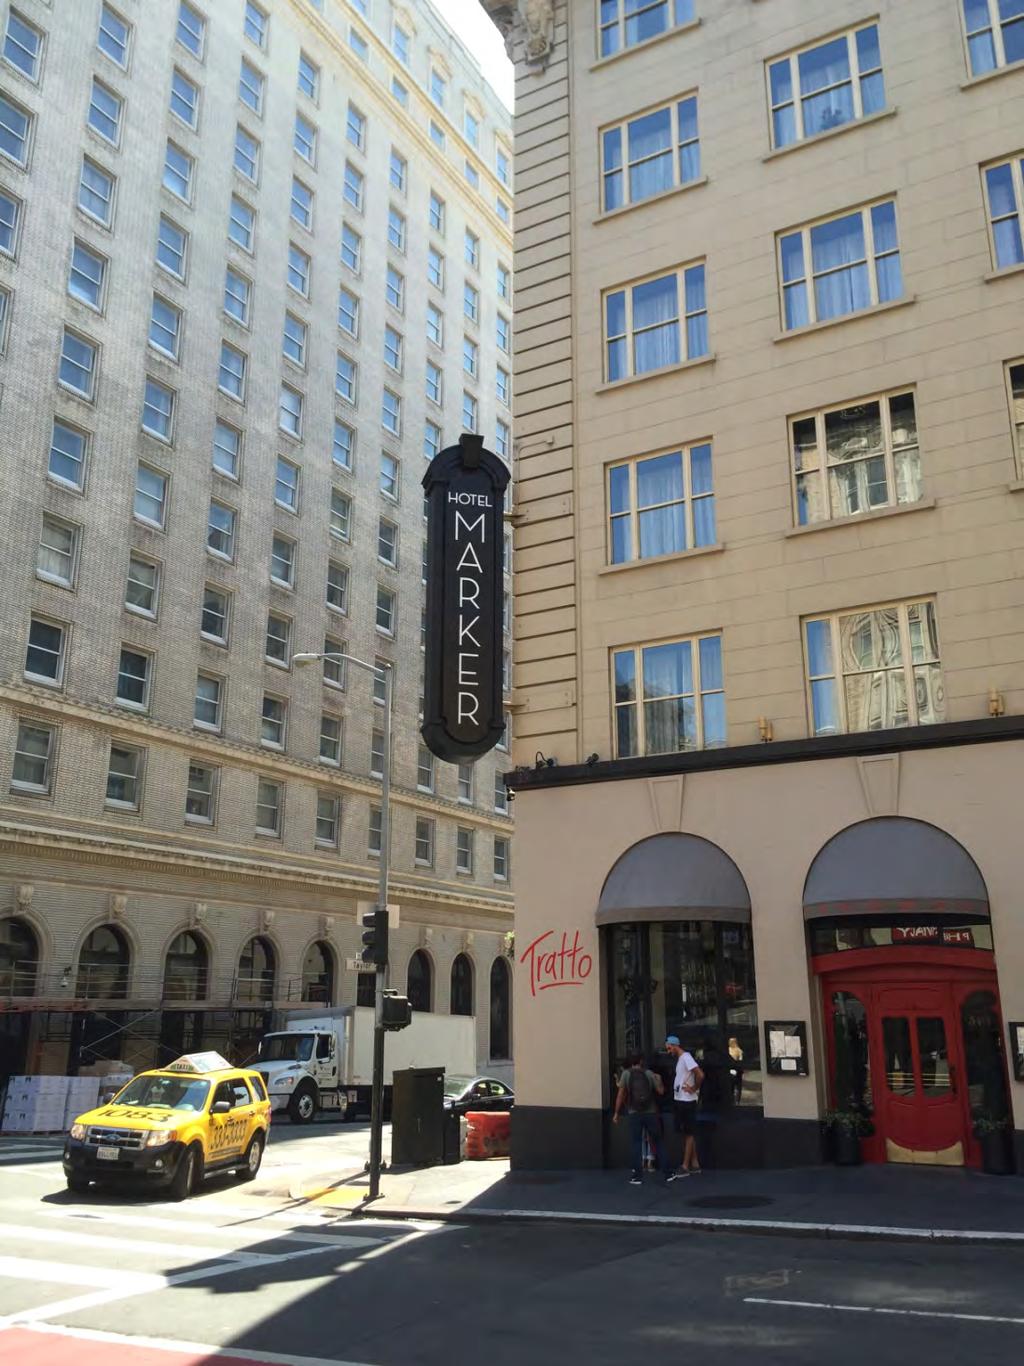 Appeals Brief 2/15/2017 501 GEARY ST 6 The Hotel Monaco had a recent change in flag and management in 2016 and after a substantial interior retrofit and renovation, the hotel name was changed to the